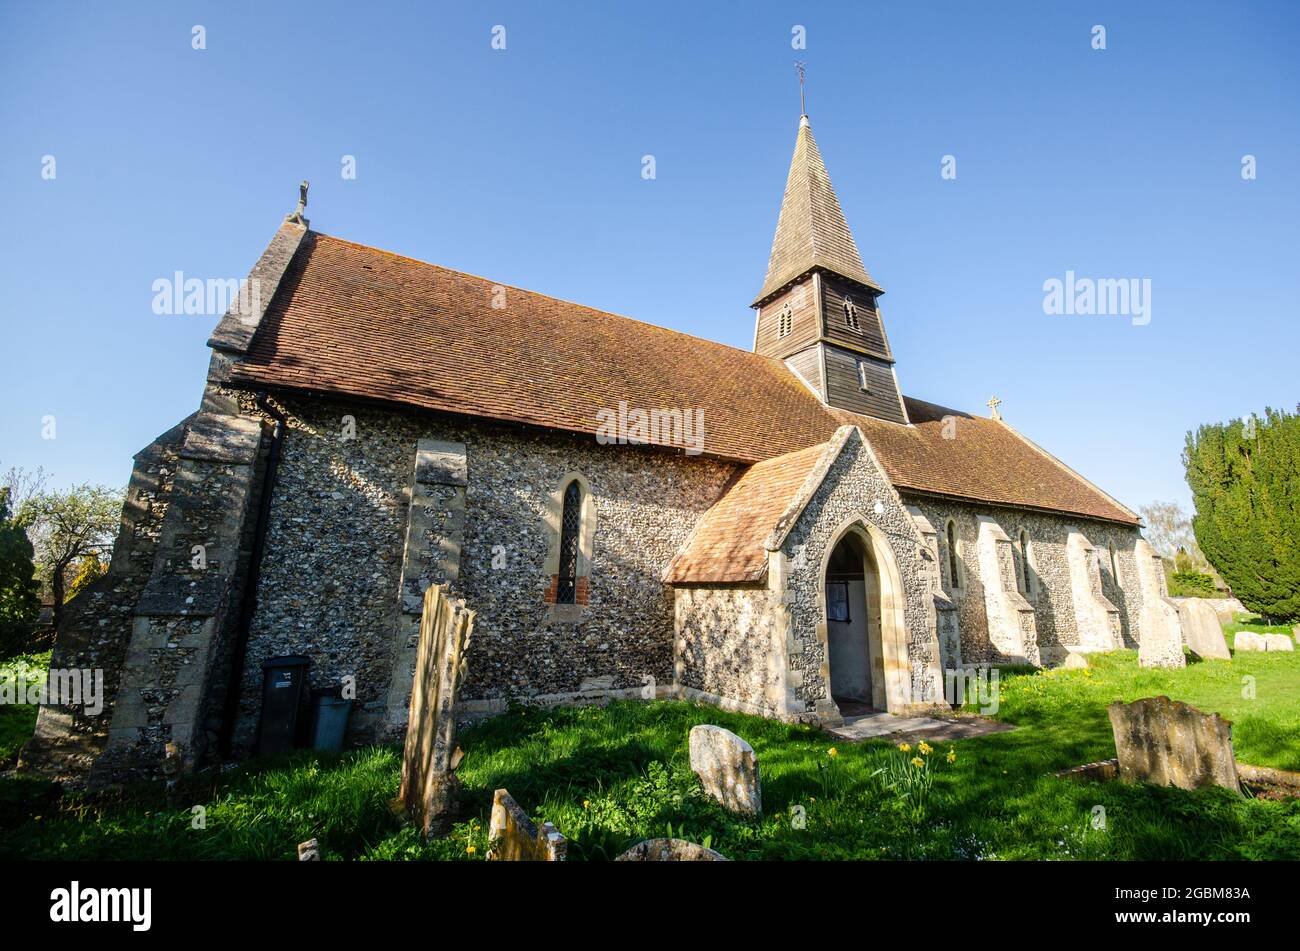 Thame, England, UK - April 18, 2015: Spring sunshine on the church, spire and graveyard of St Mary's Church in Sydenham, near Thame, Oxfordshire. Stock Photo